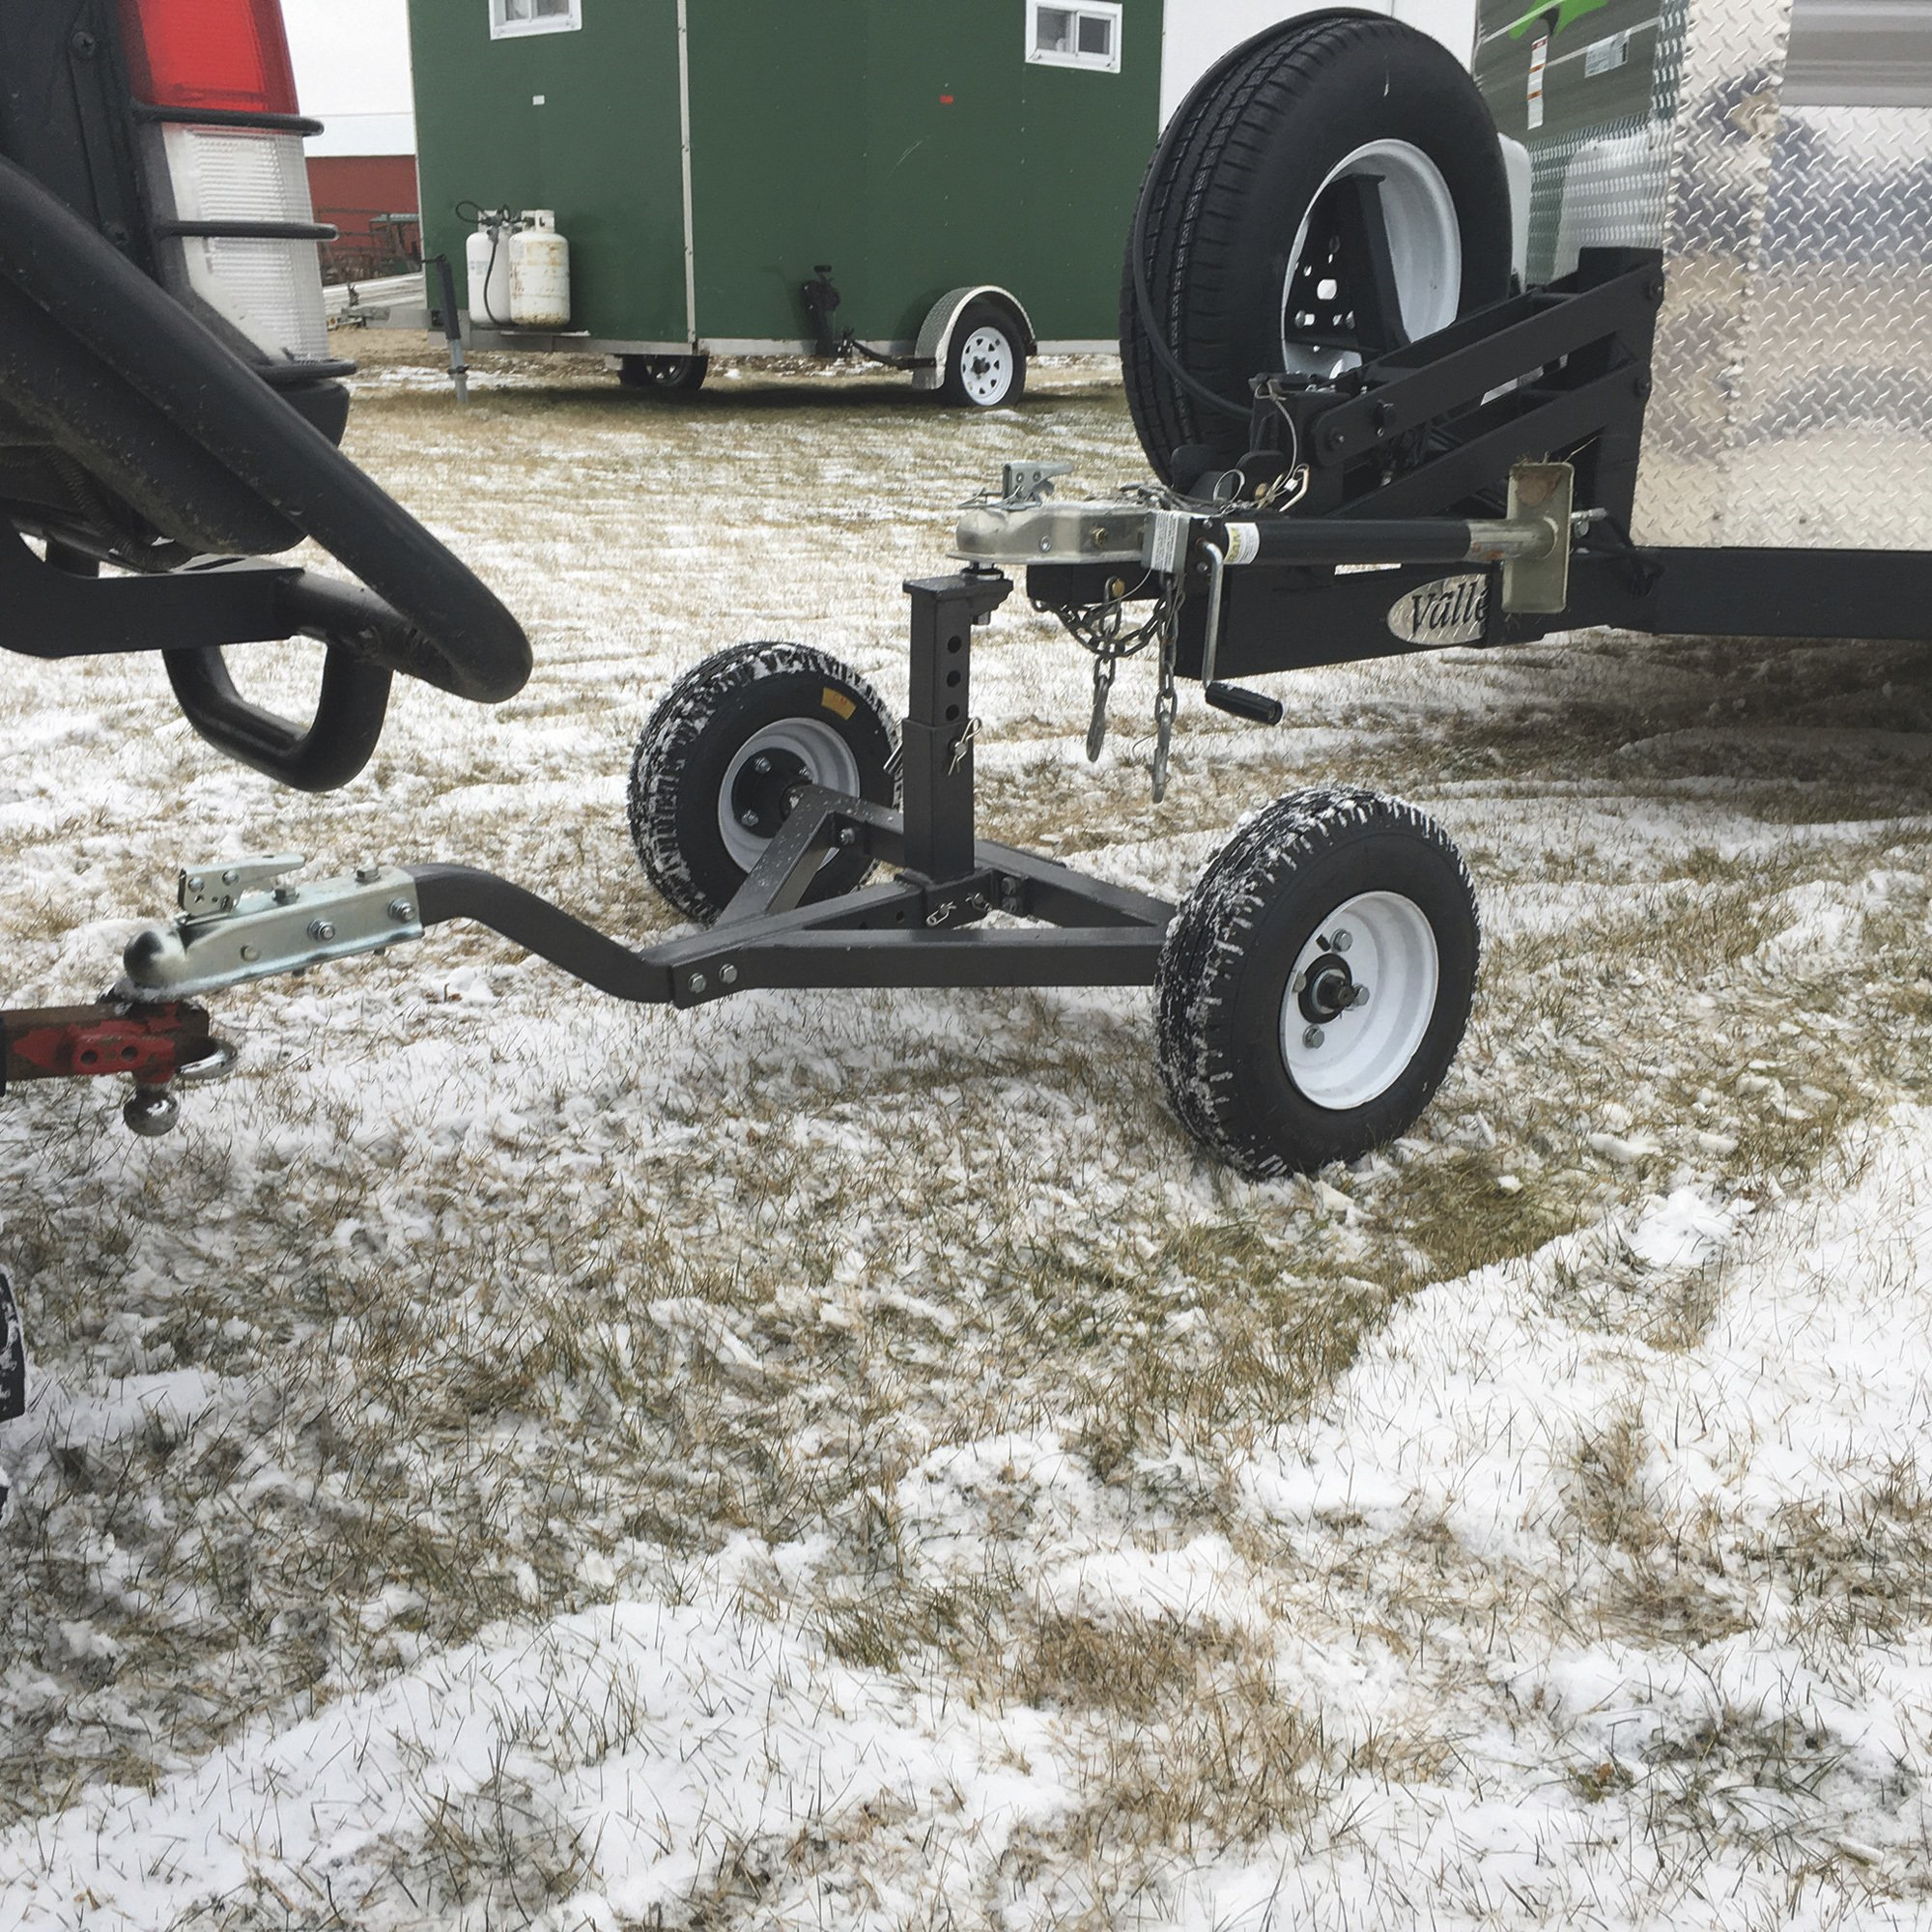 Tow Tuff TMD-1000ATV Trailer Dolly Adjustable 20" to 24.25" Max Weight 1000lbs 2" Coupler and Pin Hitch New